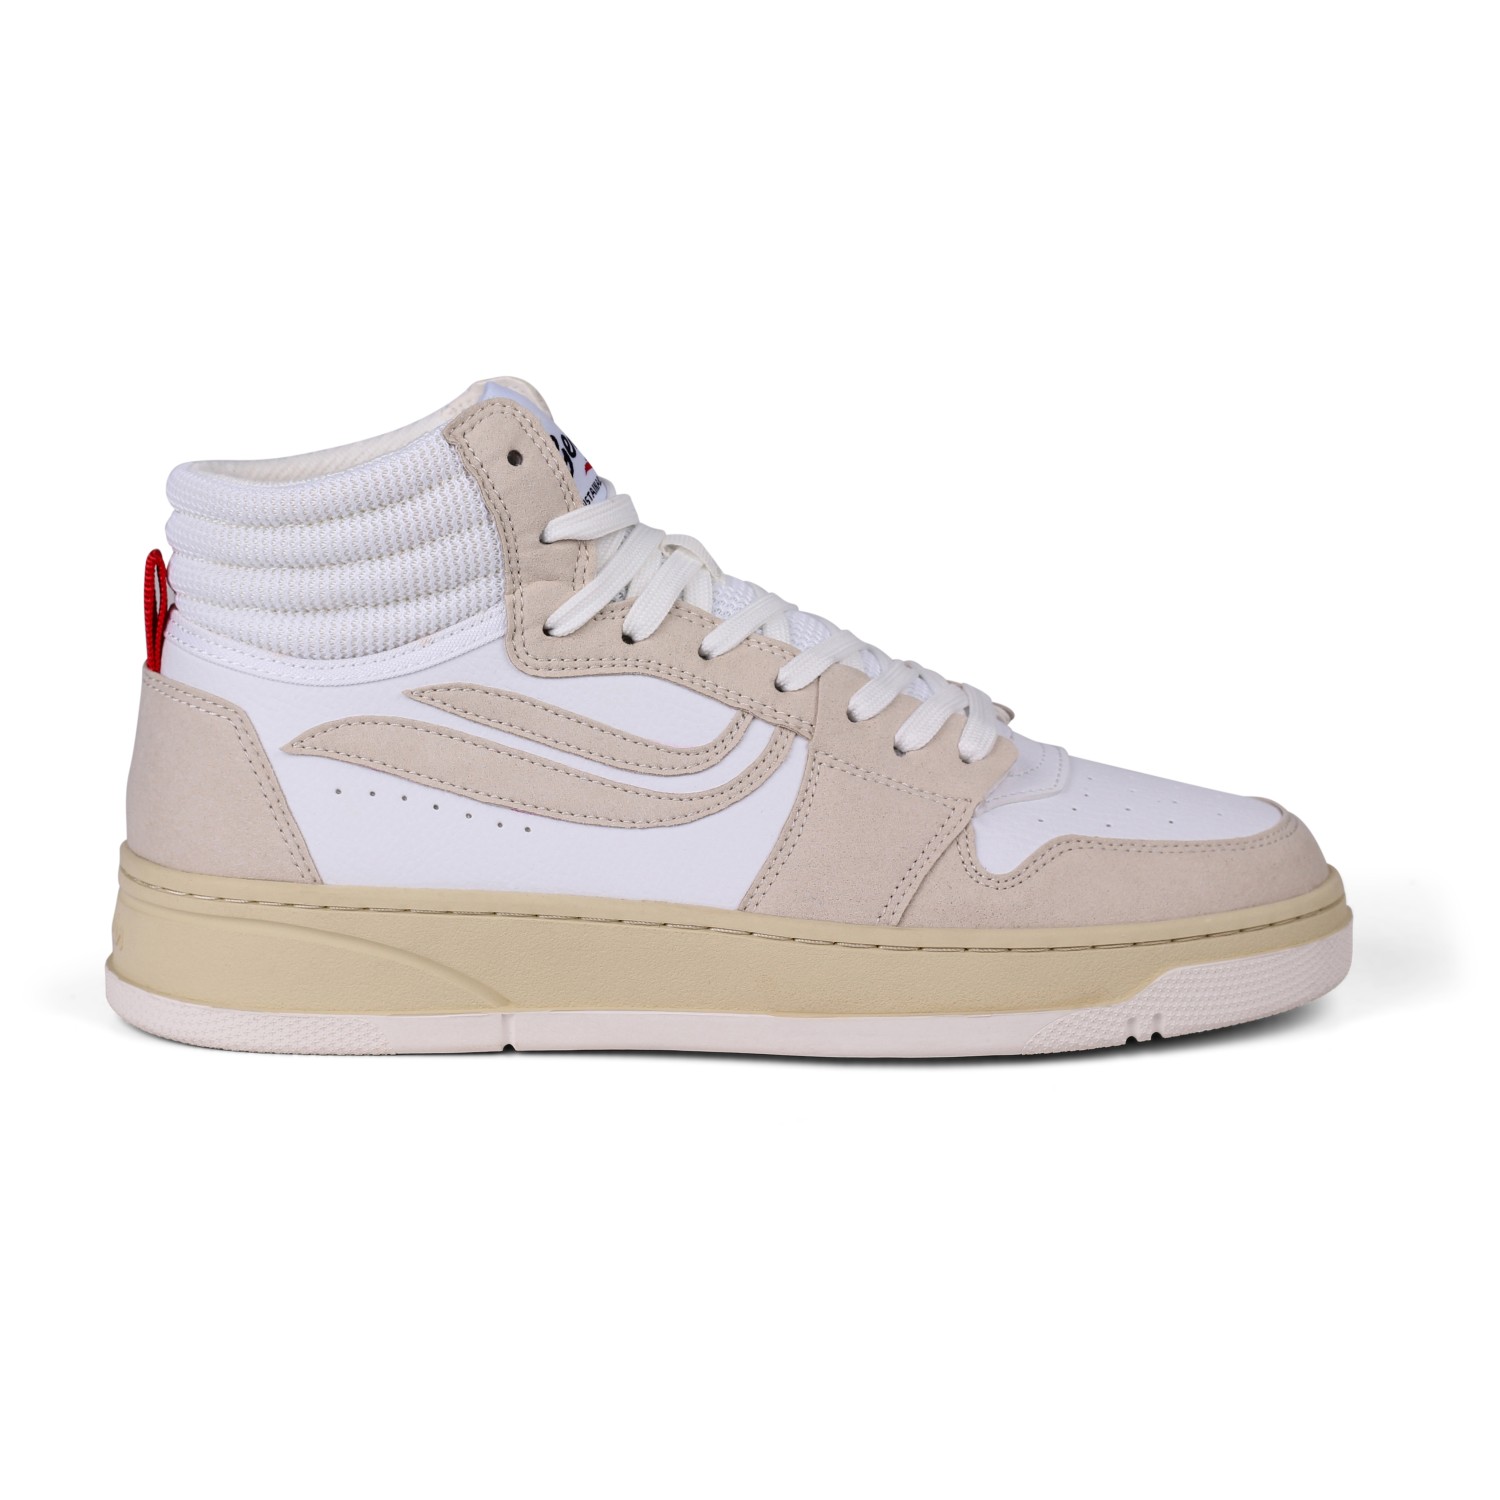 guess genesis w1254g2 Кроссовки Genesis Footwear G Bounce White Serial, цвет Offwhite/White/Offwhite